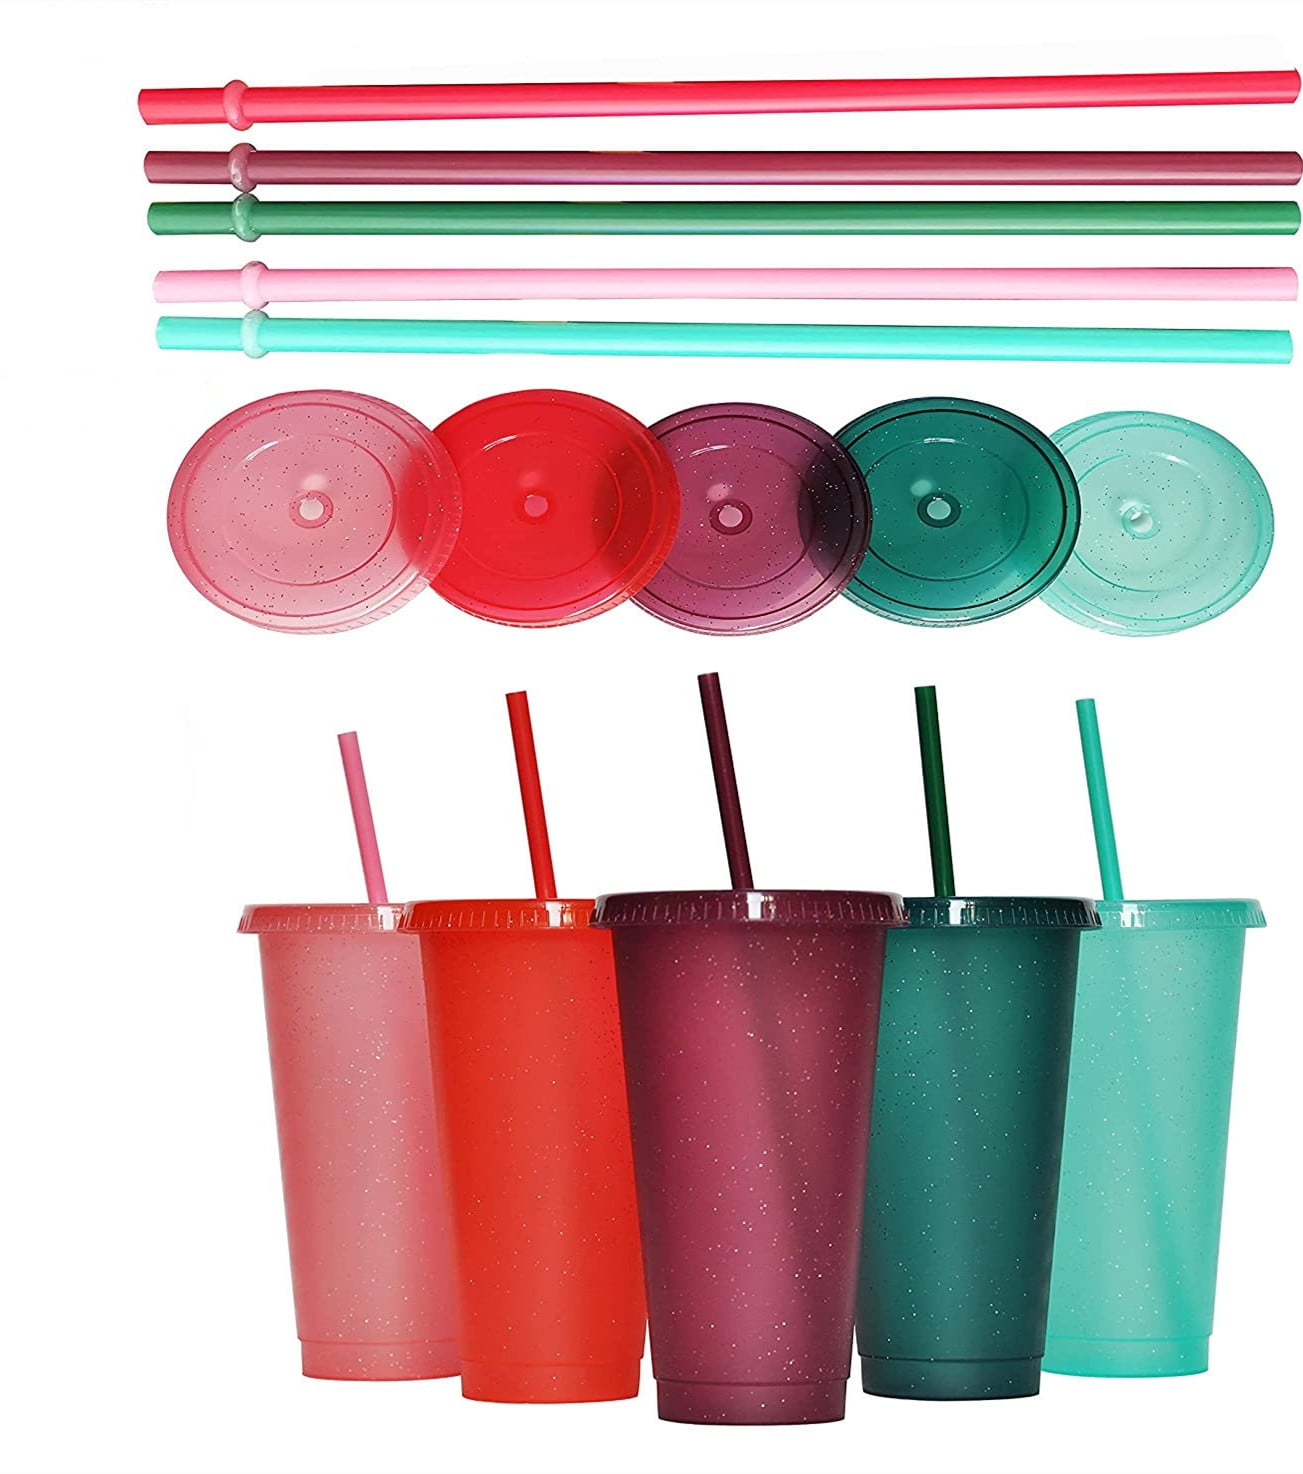 Modwnfy 16 fl oz Black Tumblers with Lids and Straws, Matte